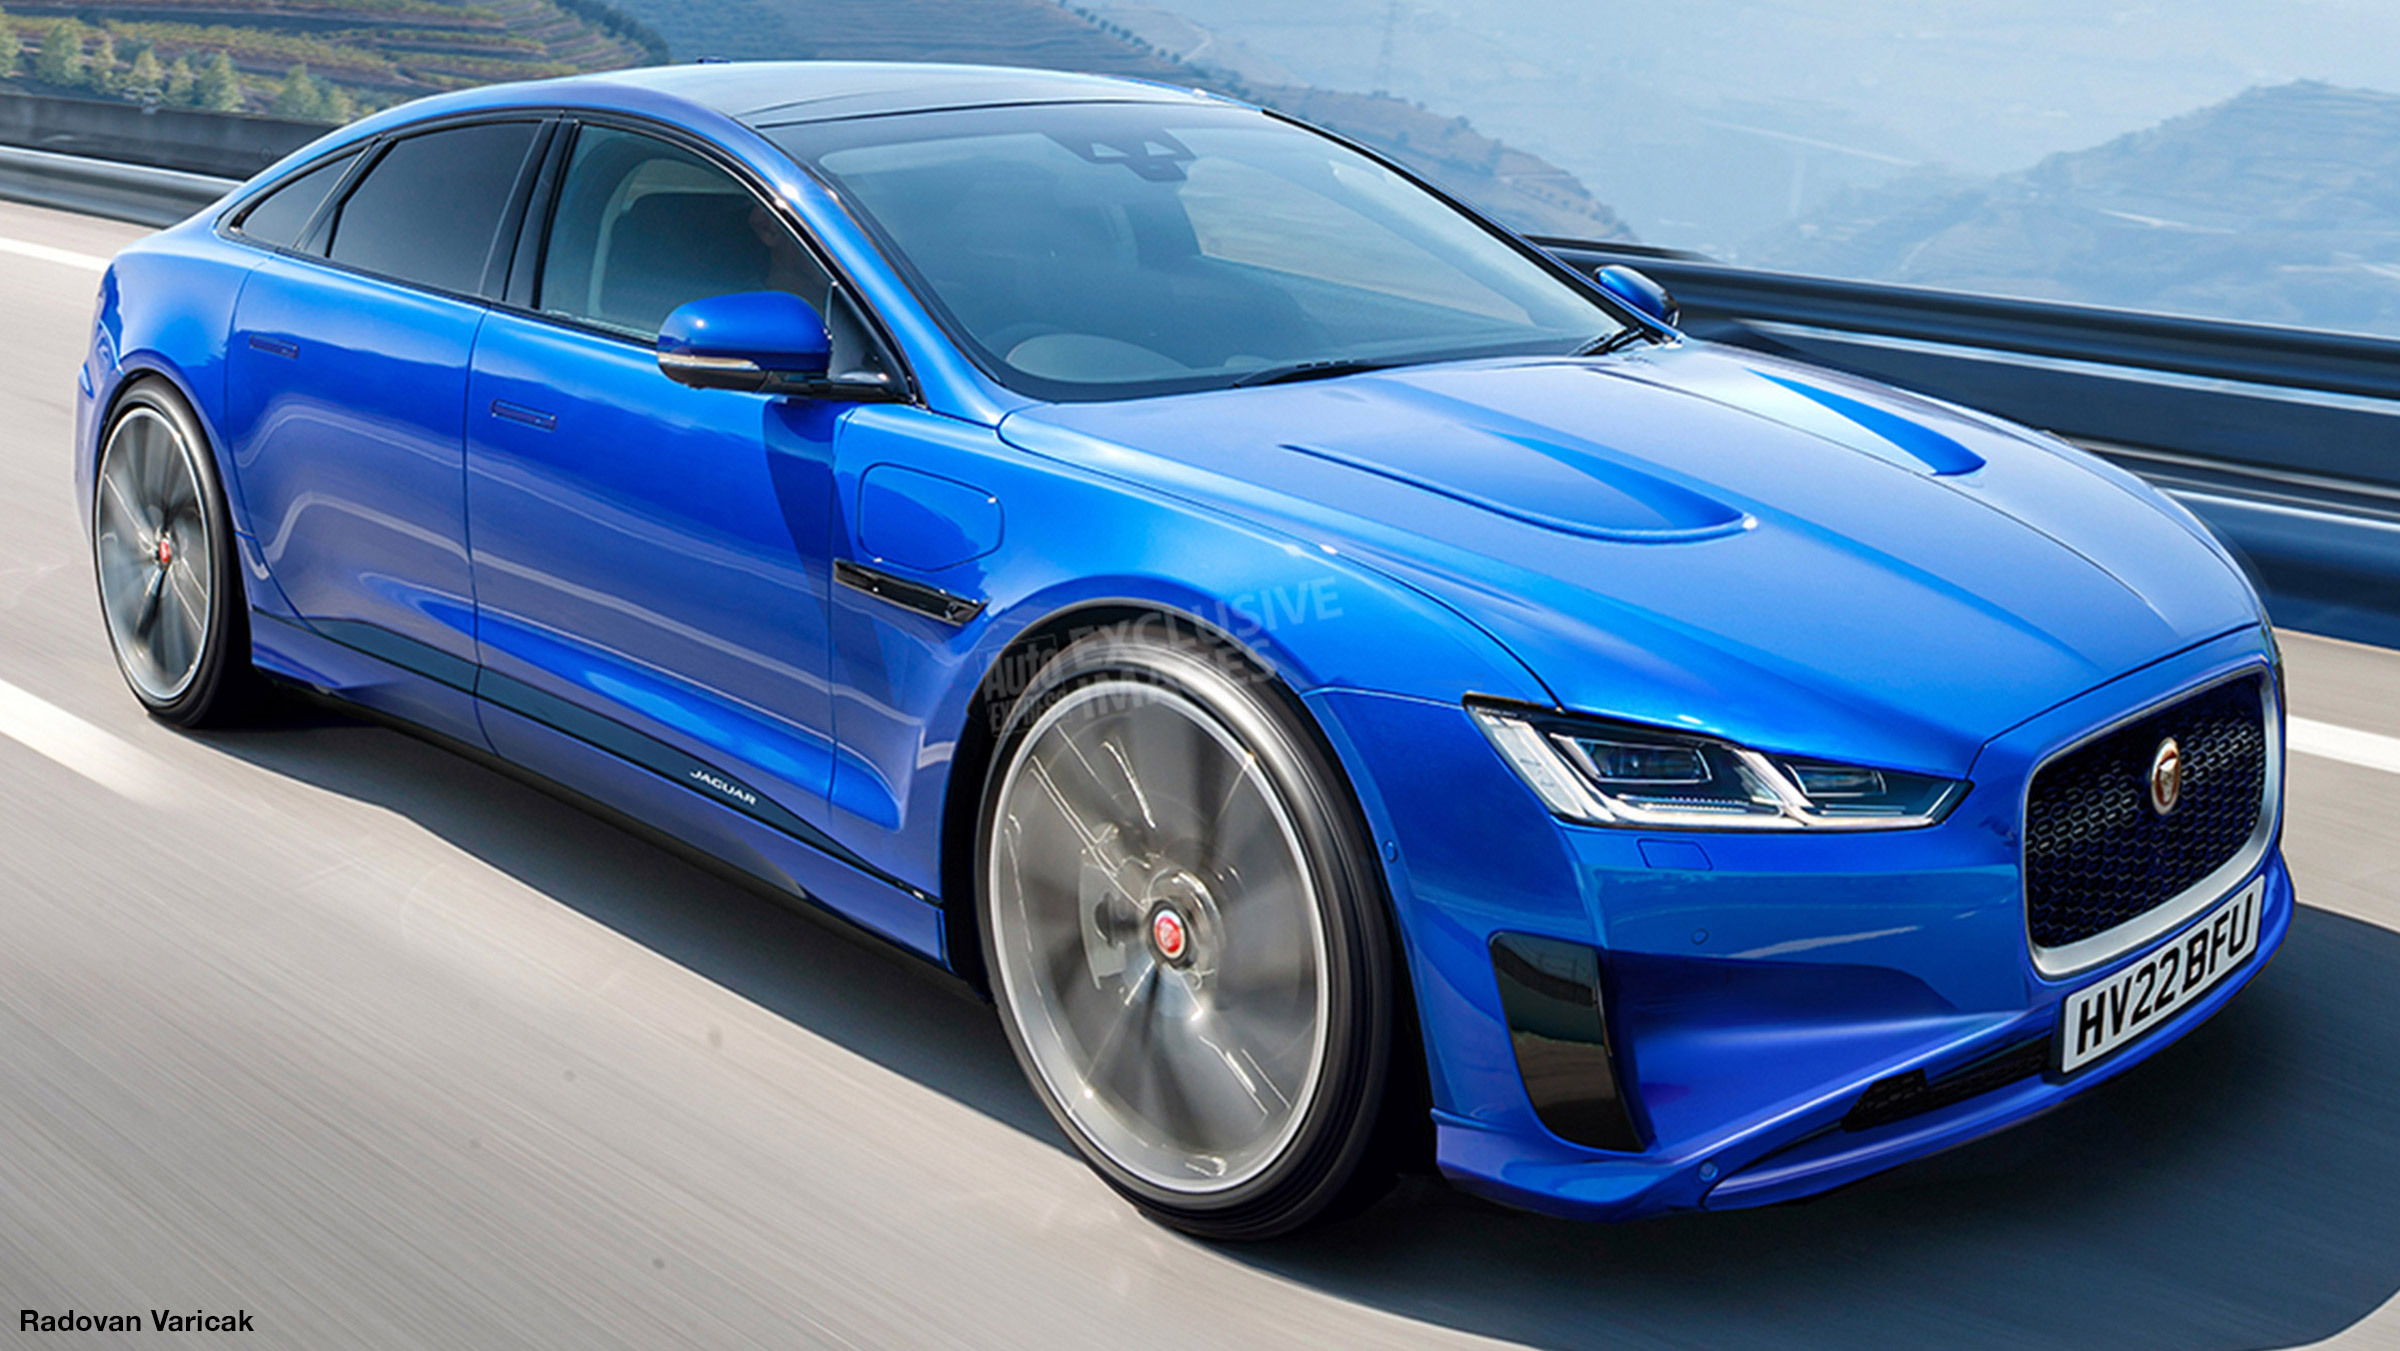  New  2022 Jaguar  XJ specs and details on the new  electric 